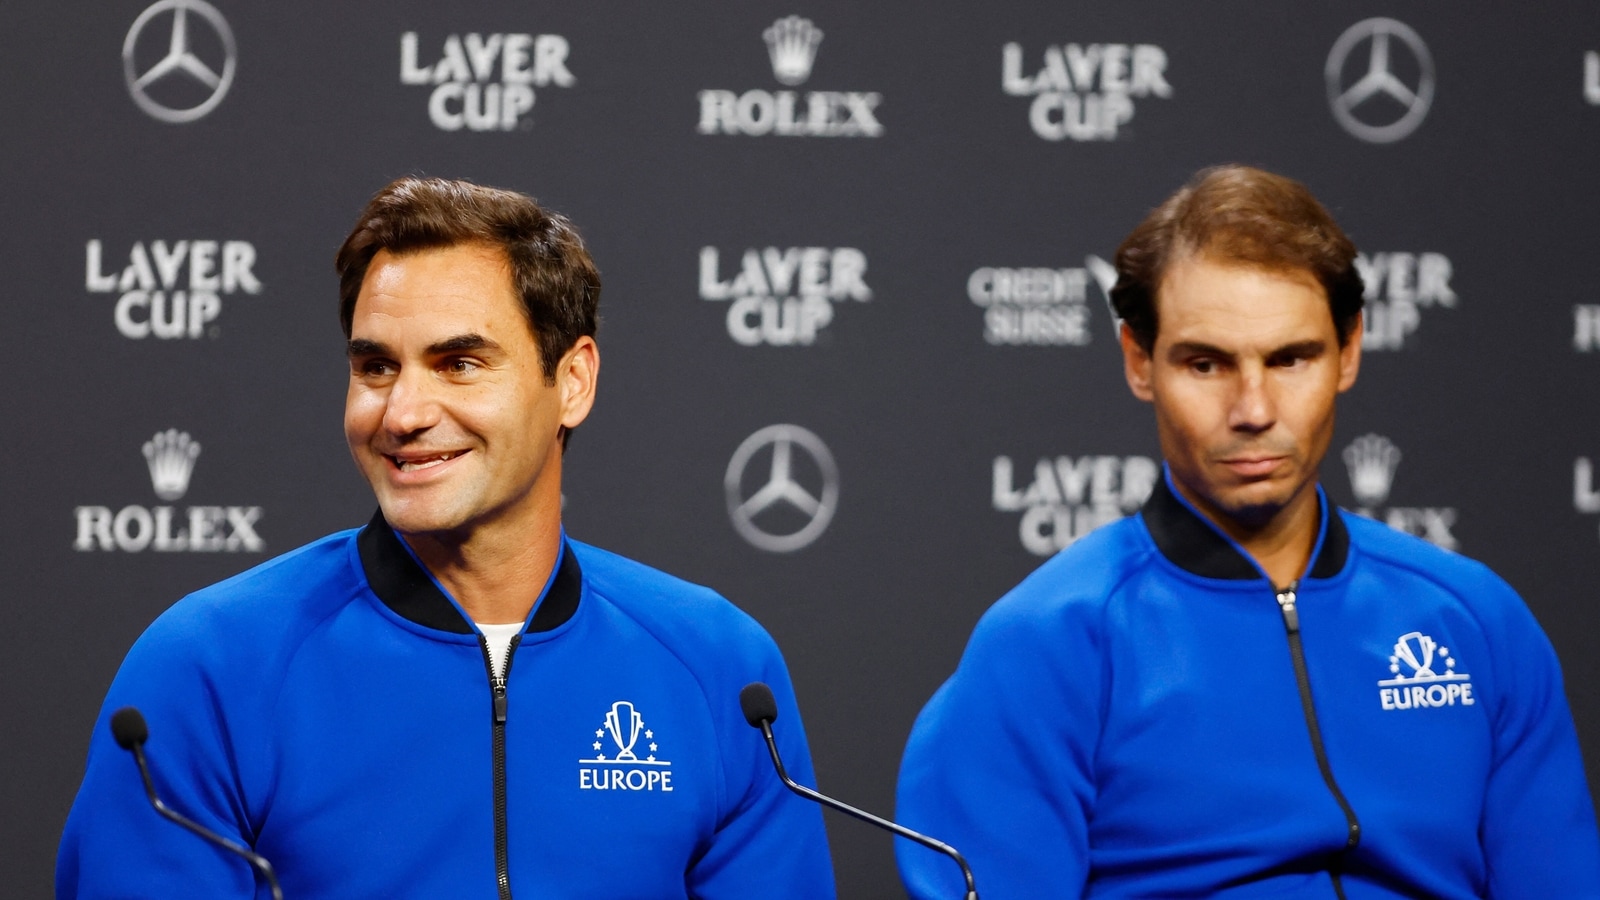 Laver Cup Federer confirmed to team up with Nadal in his final match